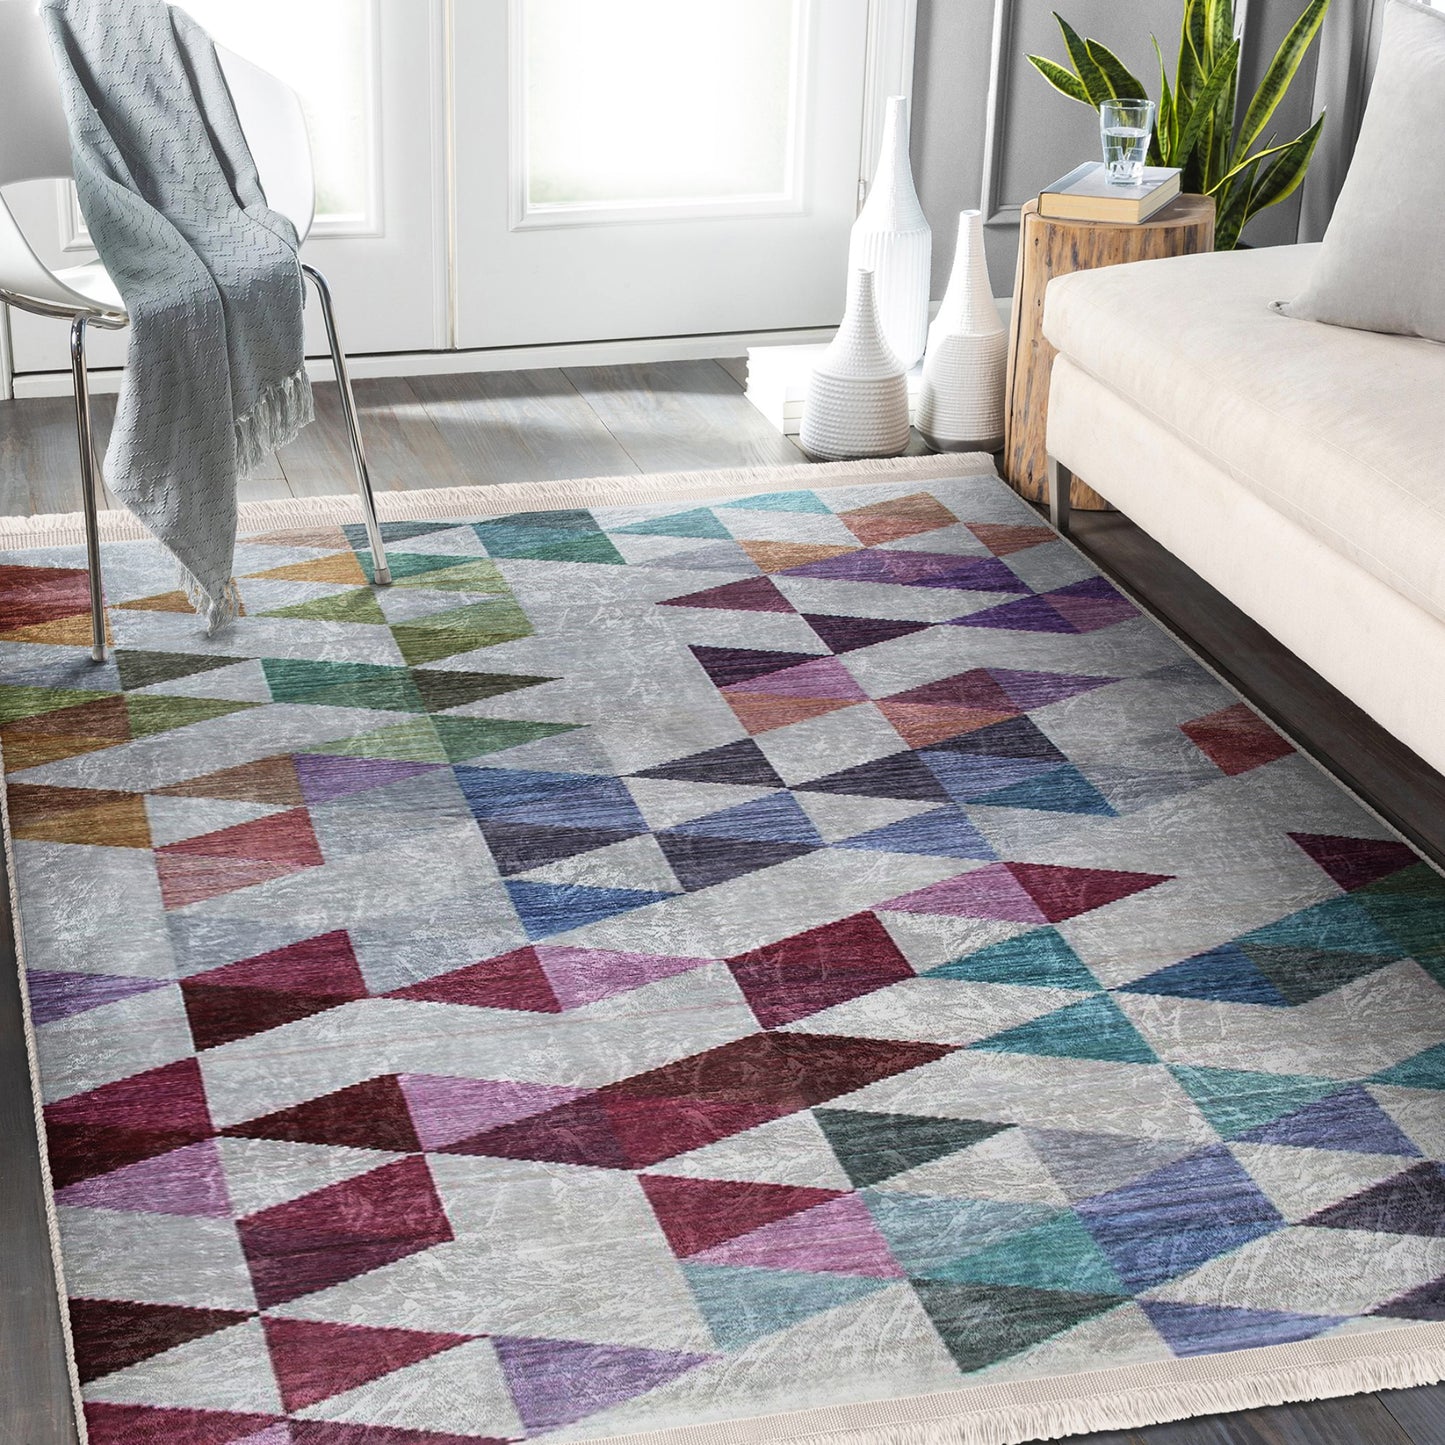 Functional and Stylish Area Rug with Serene Geometric Designs